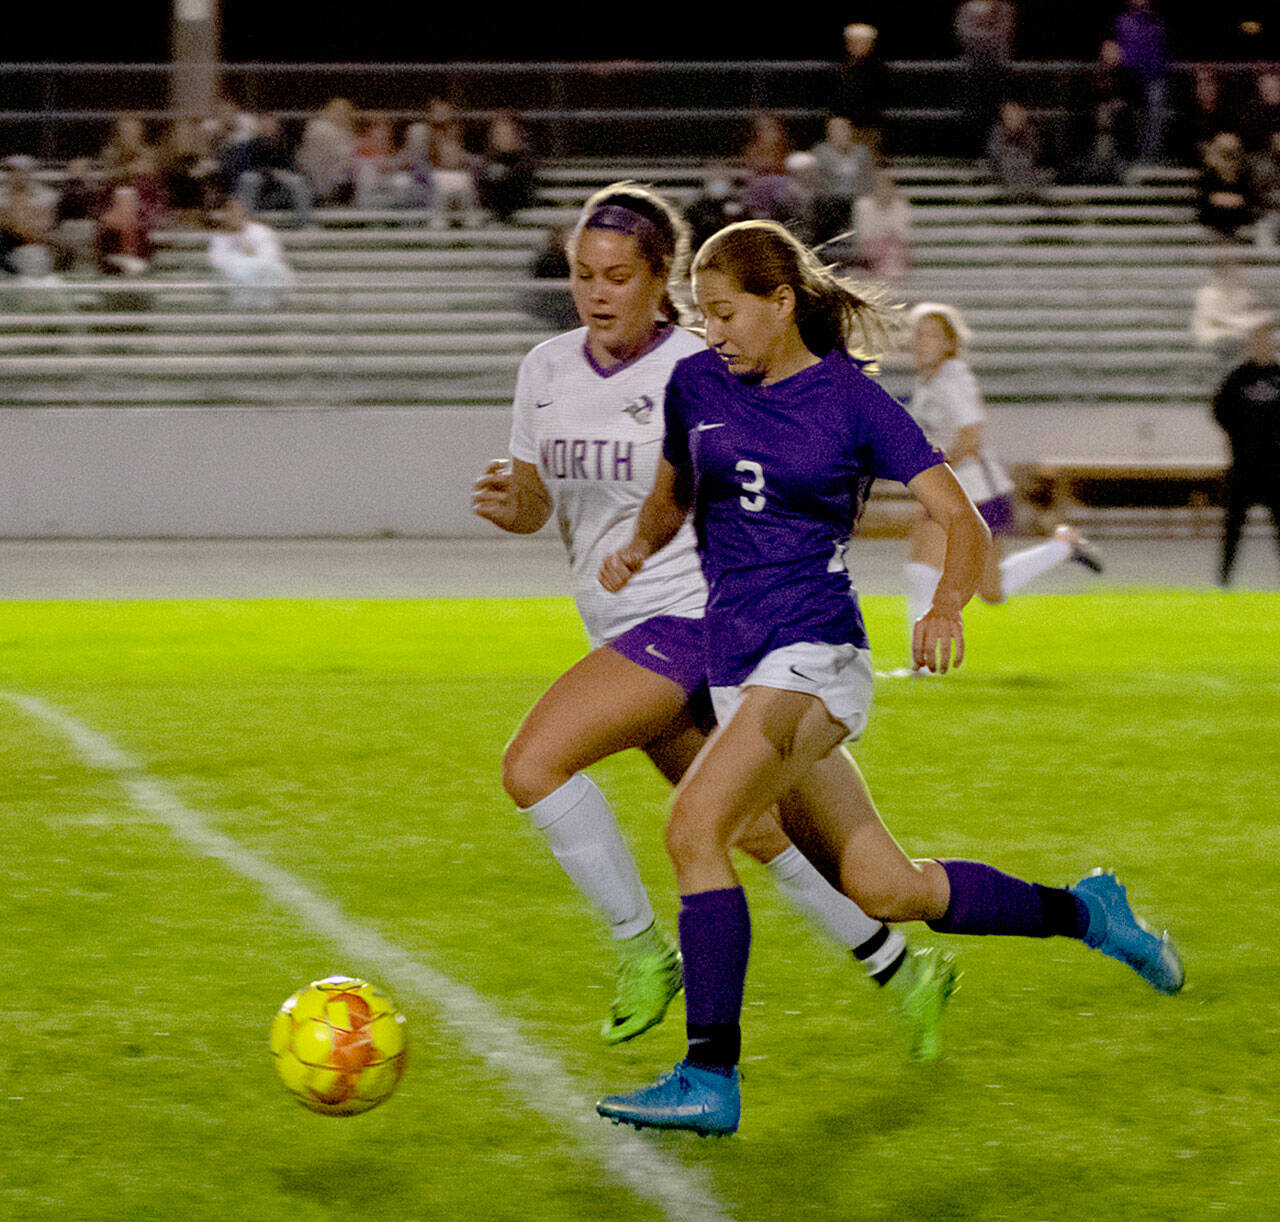 Taryn Johnson, Sequim soccer, made the Olympic 2A League first-team as a sophomore, leading the Wolves in goals with 24. Sequim Gazette file photo by Emily Matthiessen